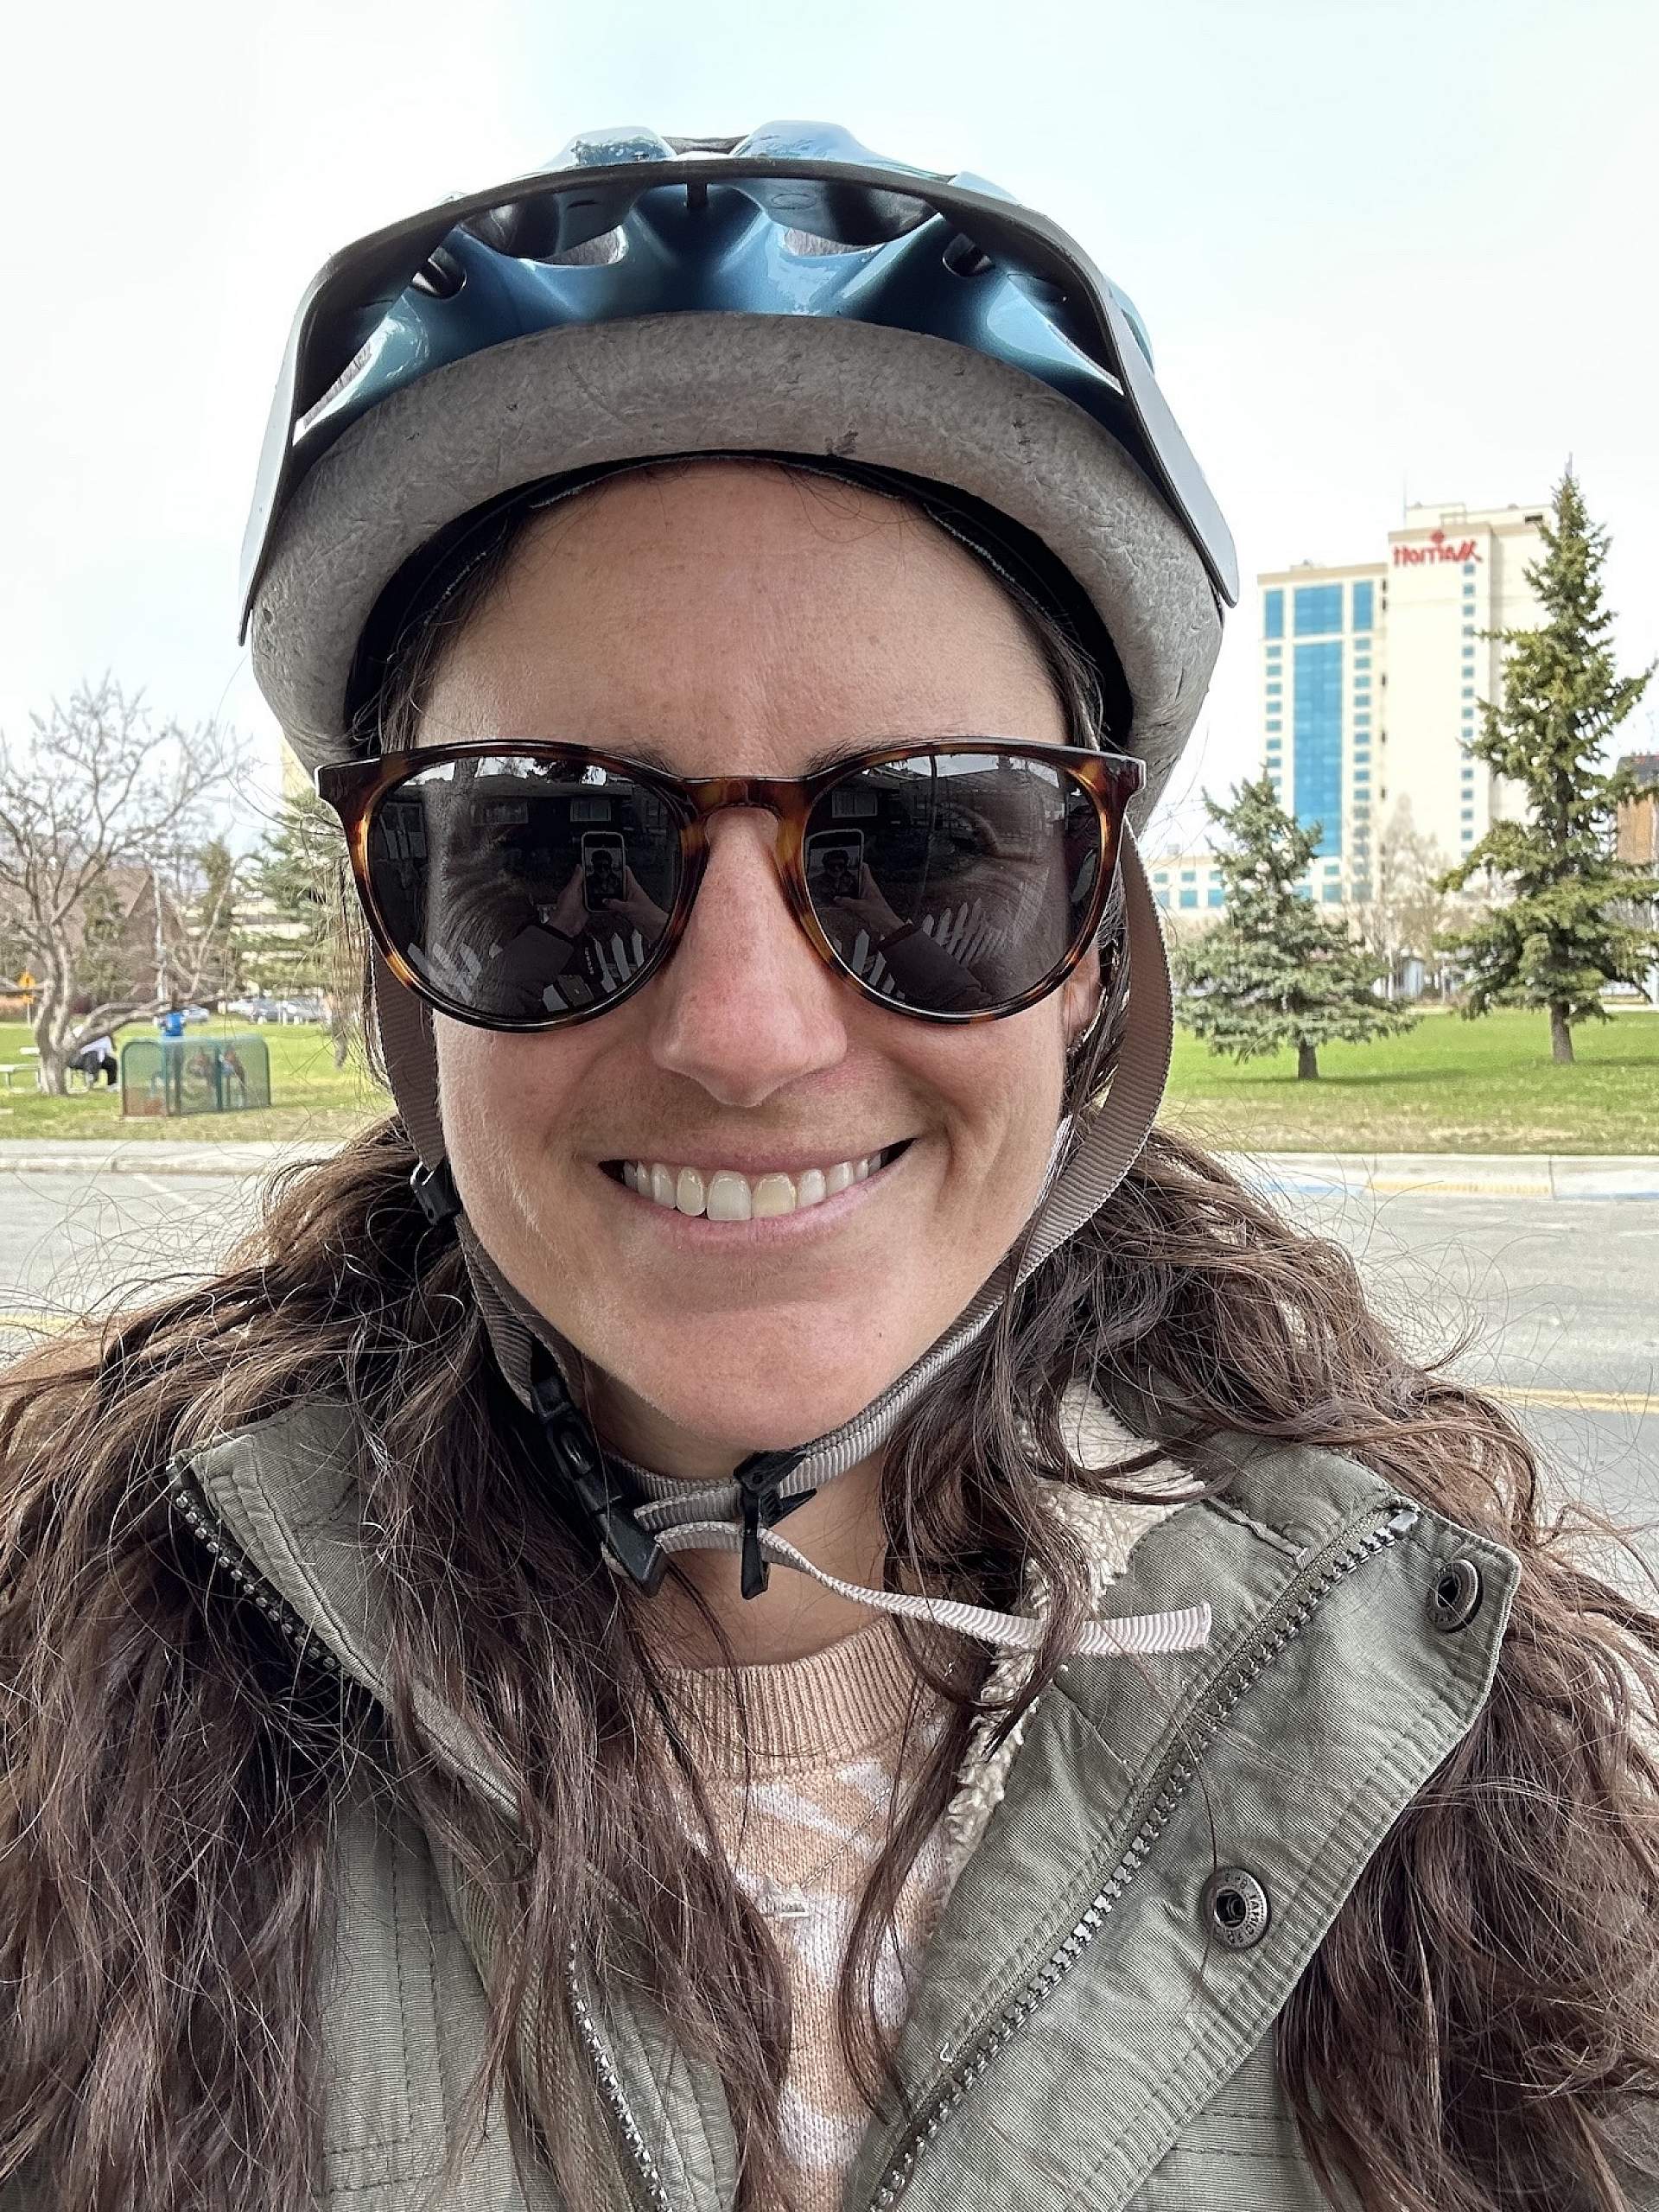 Jaime poses for a selfie, ready to ride on her Segway tour of Anchorage.